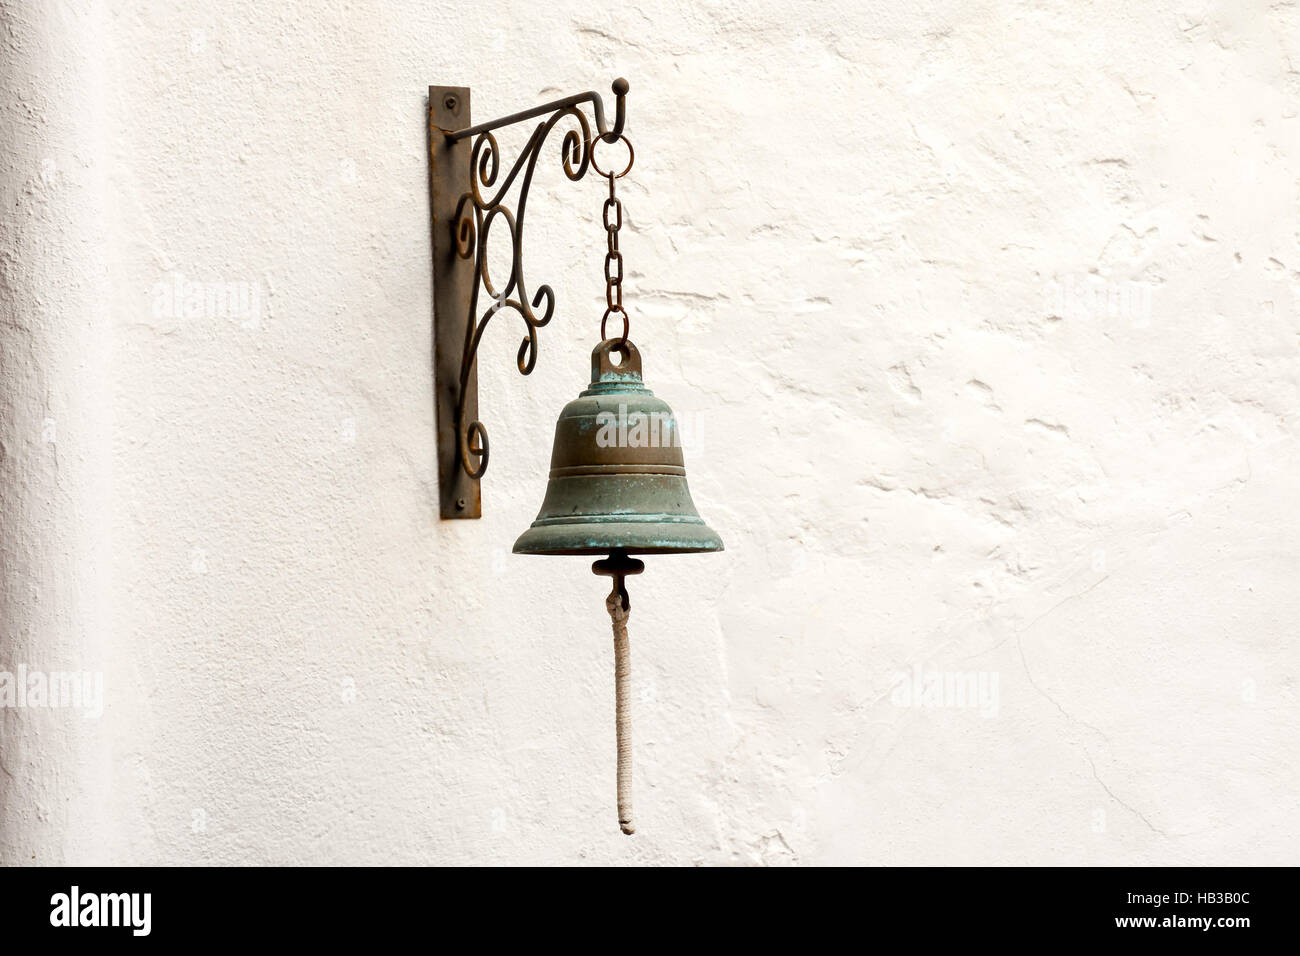 Big bell stock photo. Image of chime, bell, bellhop, metallic